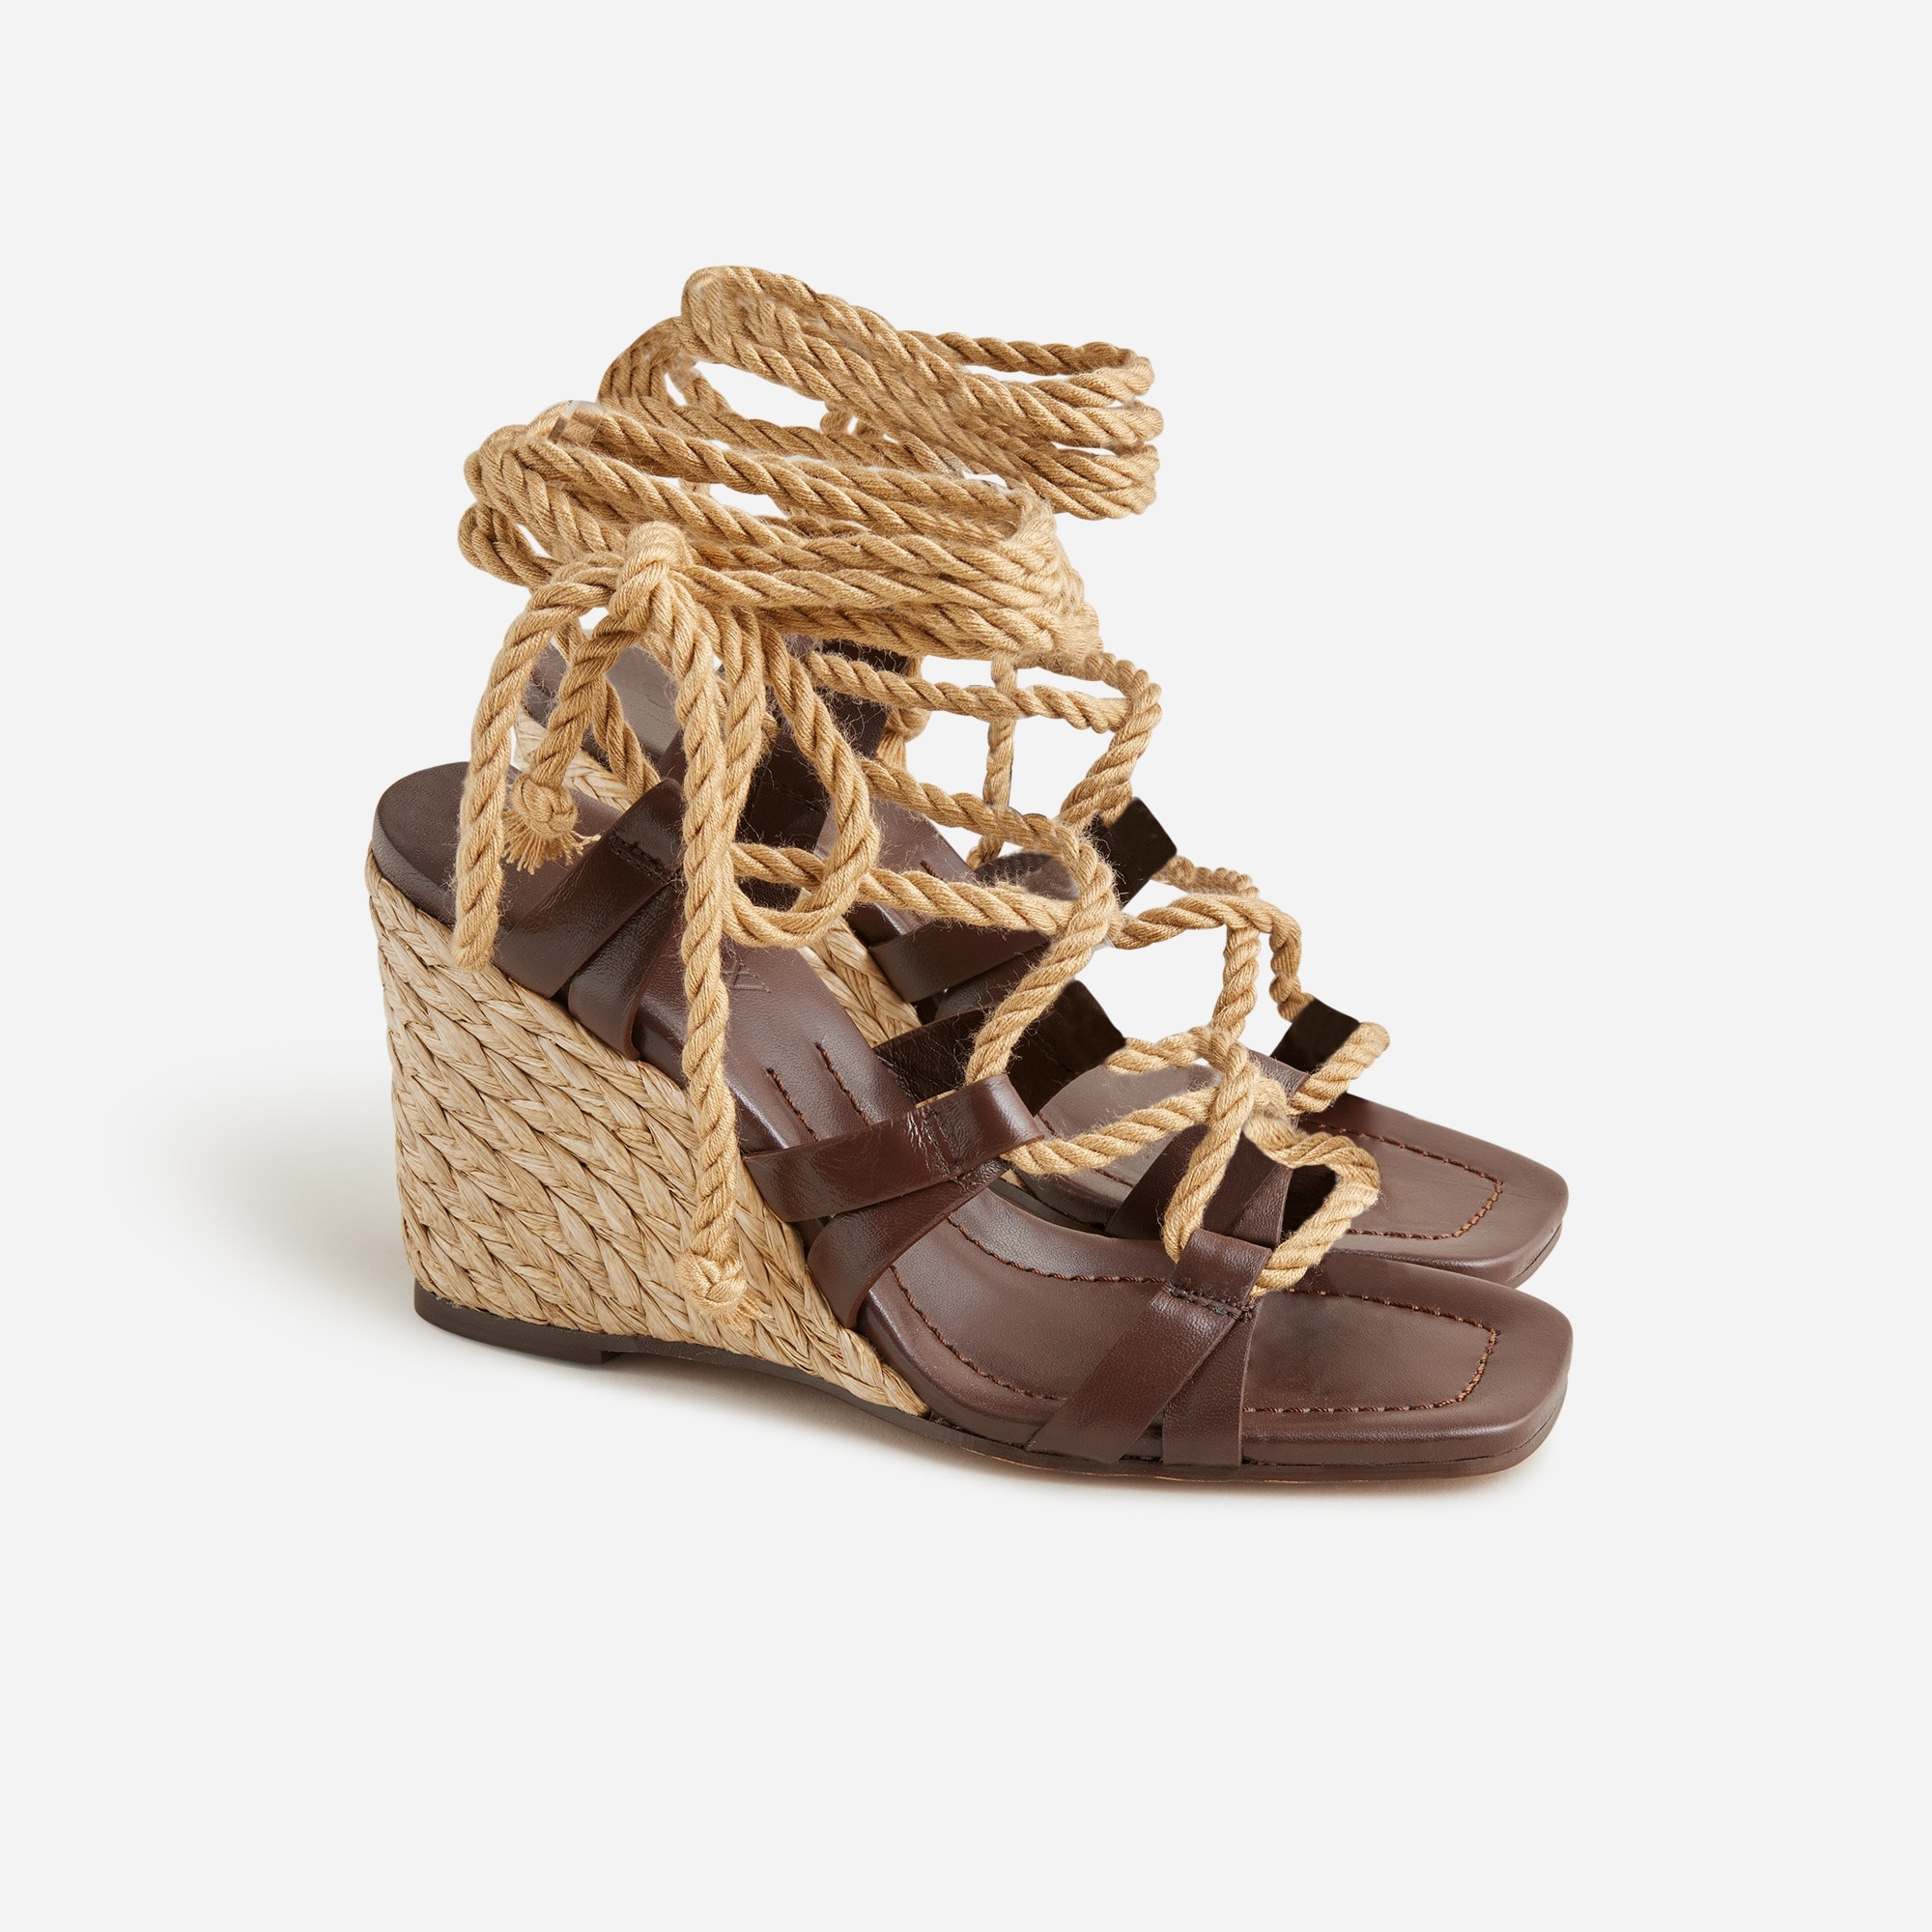  Made-in-Spain rope lace-up high-heel sandals in leather